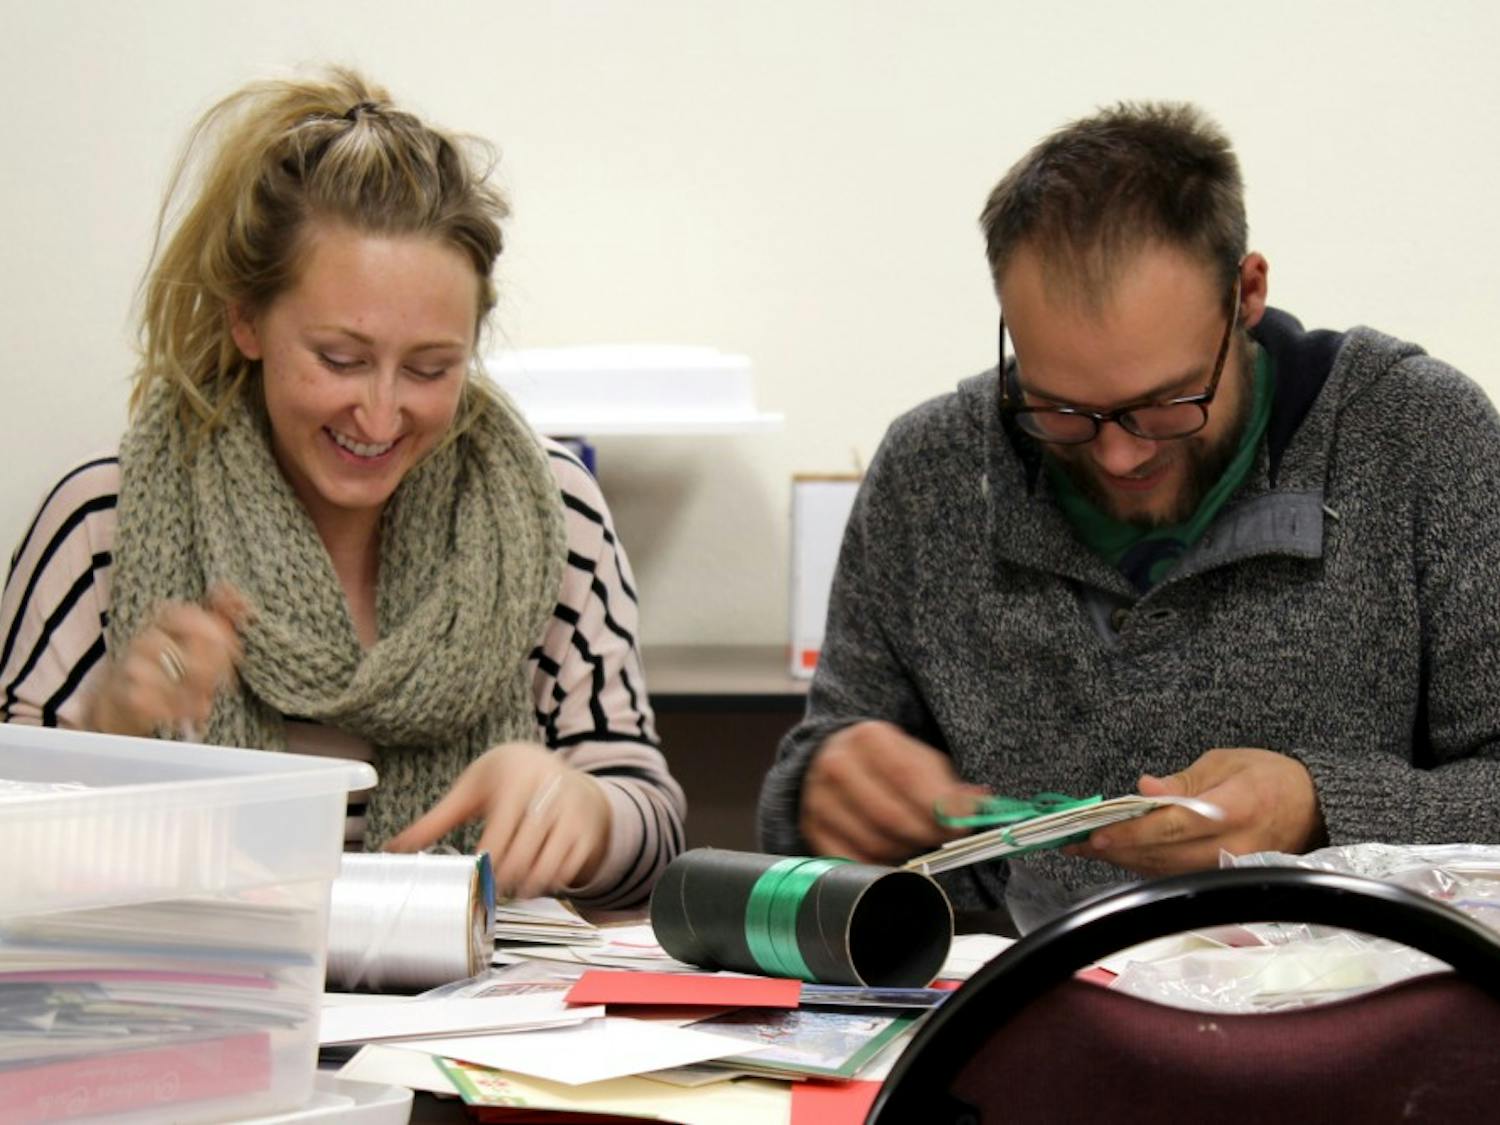 Johannah Maybach, left, and her boyfriend Andrew Stuntz volunteer at their first gift-wrapping event of the season at the UNM Continuing Education building. Maybach is a student from Ft. Lewis, while Stuntz studies at UNM.